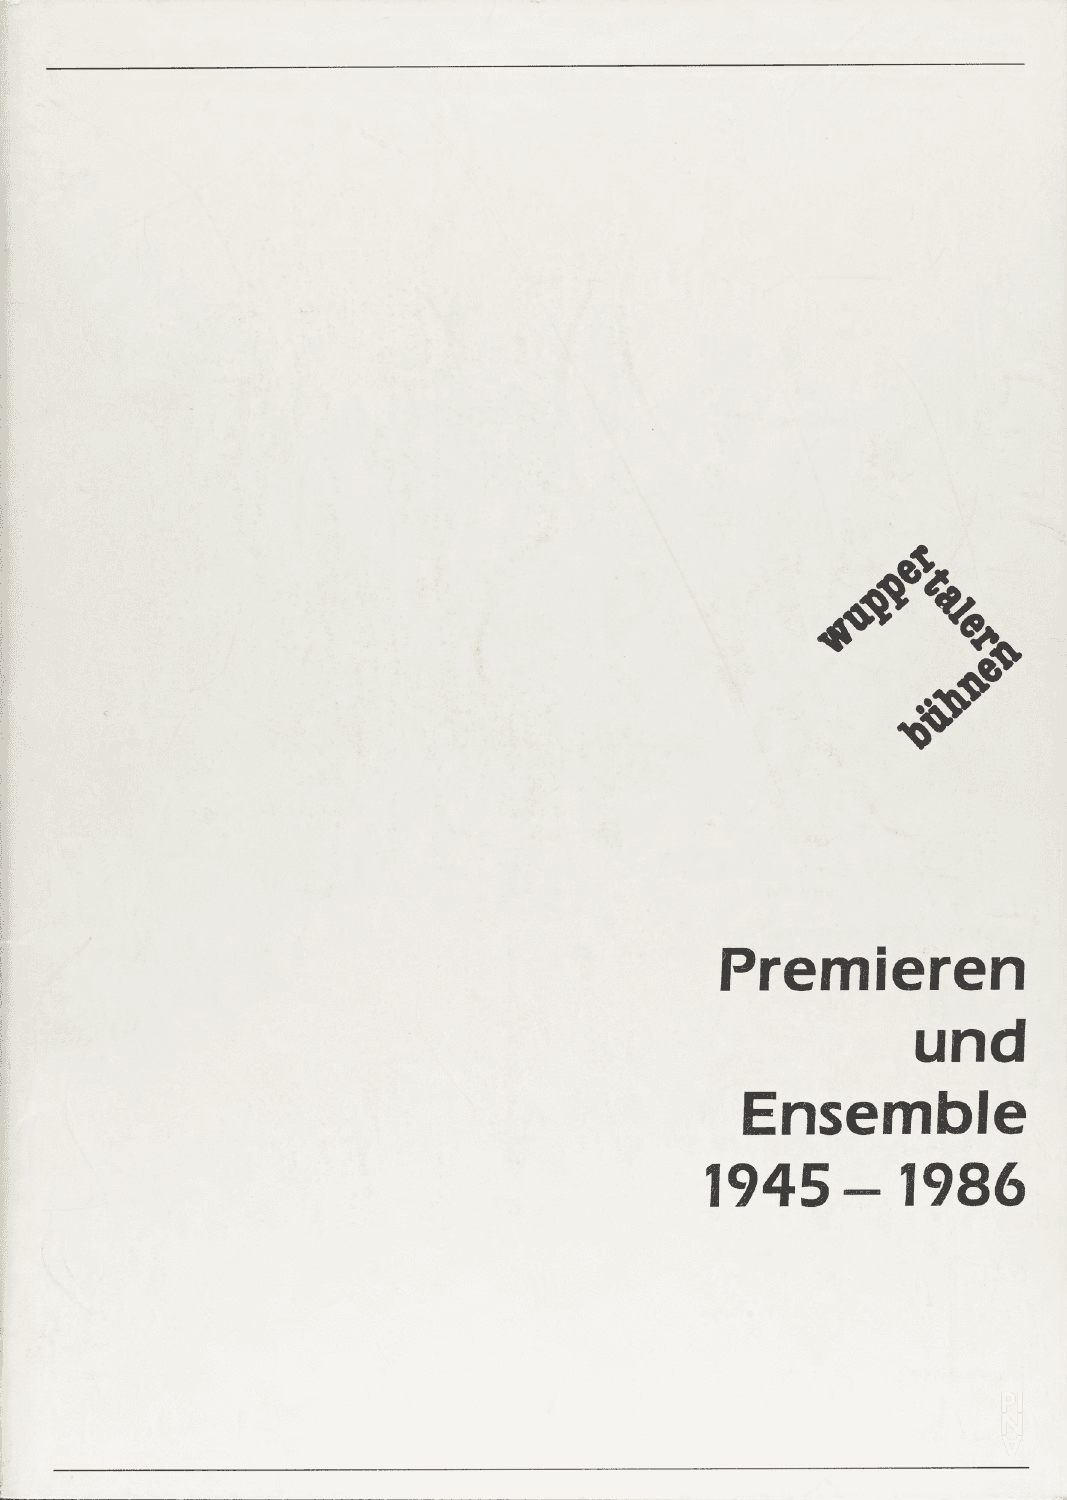 Statistics for “Tannhäuser Bacchanal” by Pina Bausch with Folkwangballett, “The green Table” and “Gross-Stadt” by Kurt Jooss with Tanztheater Wuppertal, “Rodeo” by Agnes de Mille with Tanztheater Wuppertal and more in in Wuppertal, 03/12/1972 – 05/14/1986